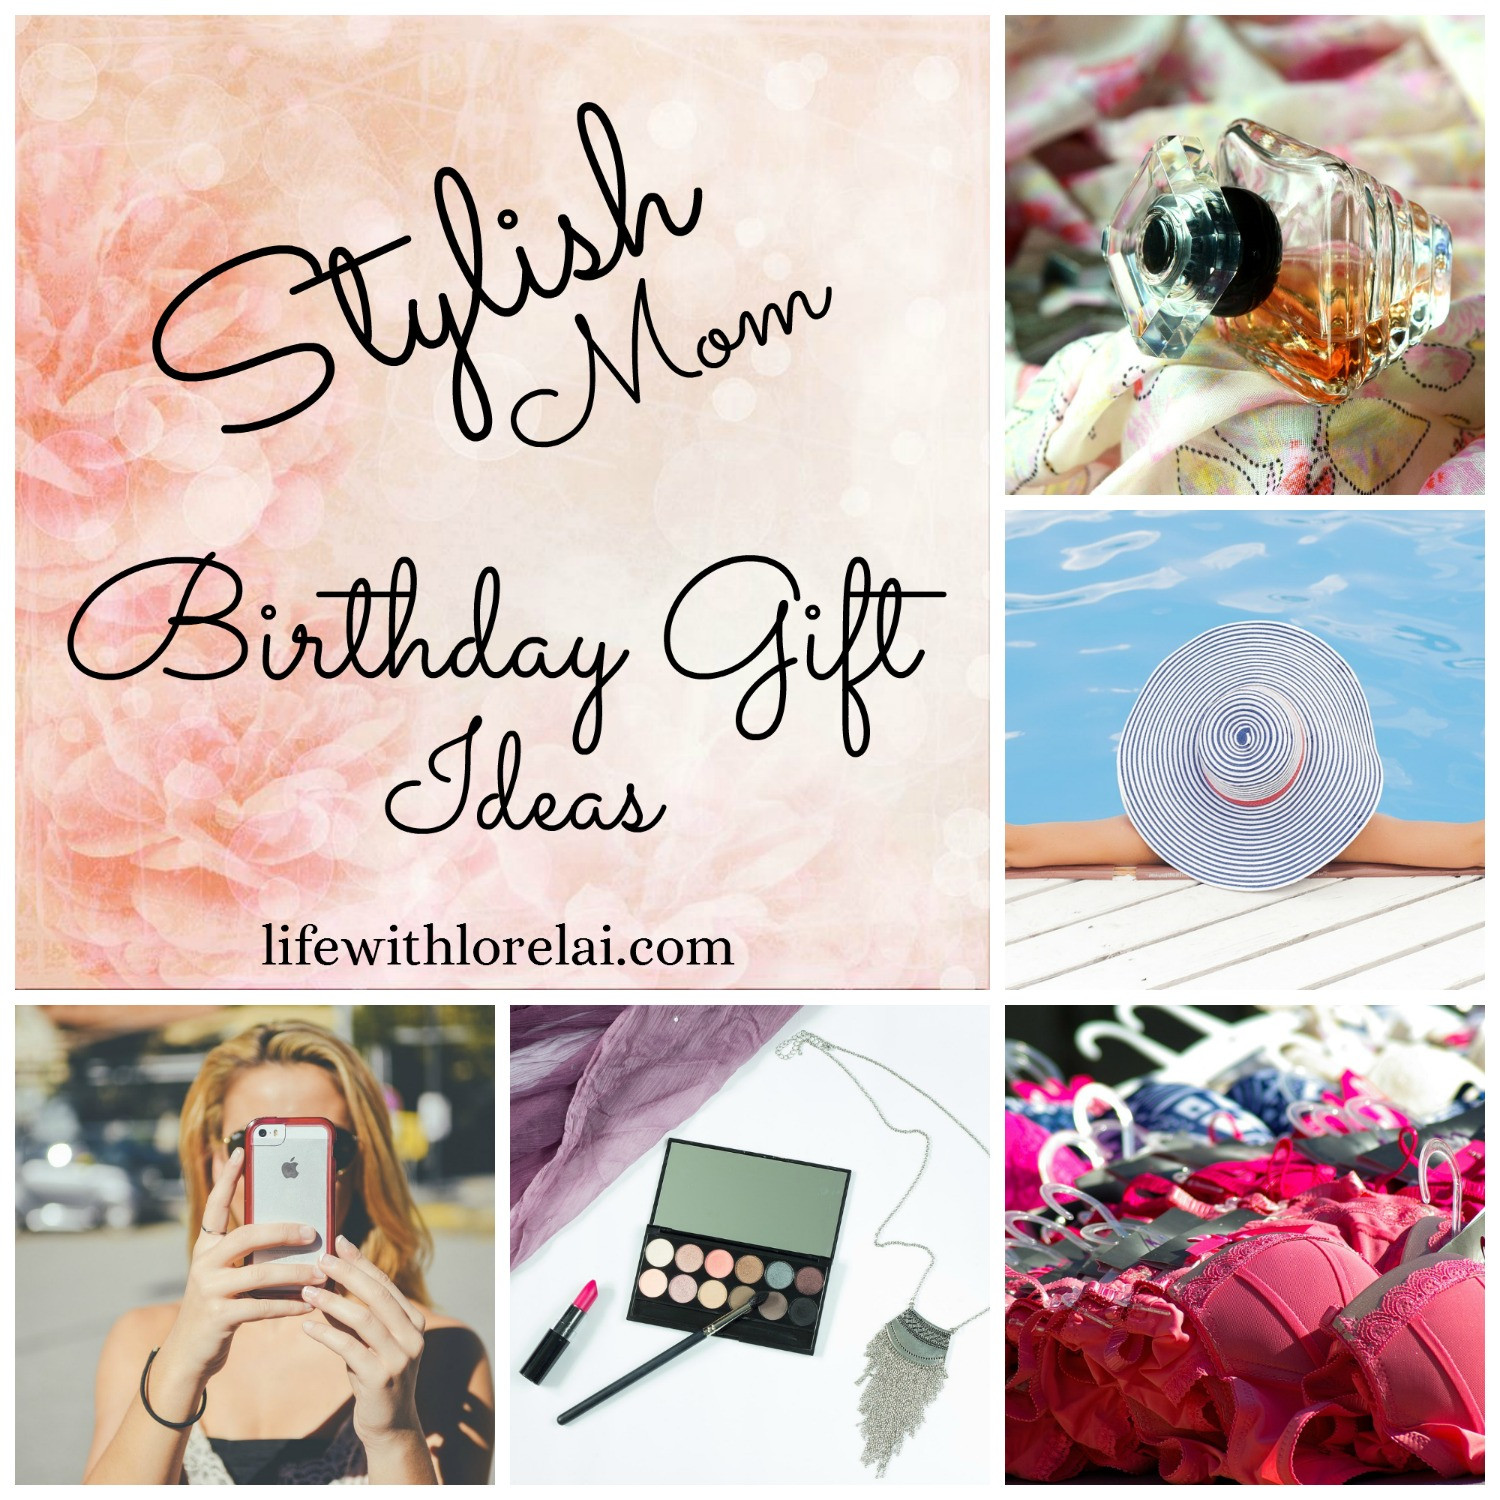 Birthday Gifts For Mother
 Birthday Gift Ideas For The Stylish Mom Life With Lorelai